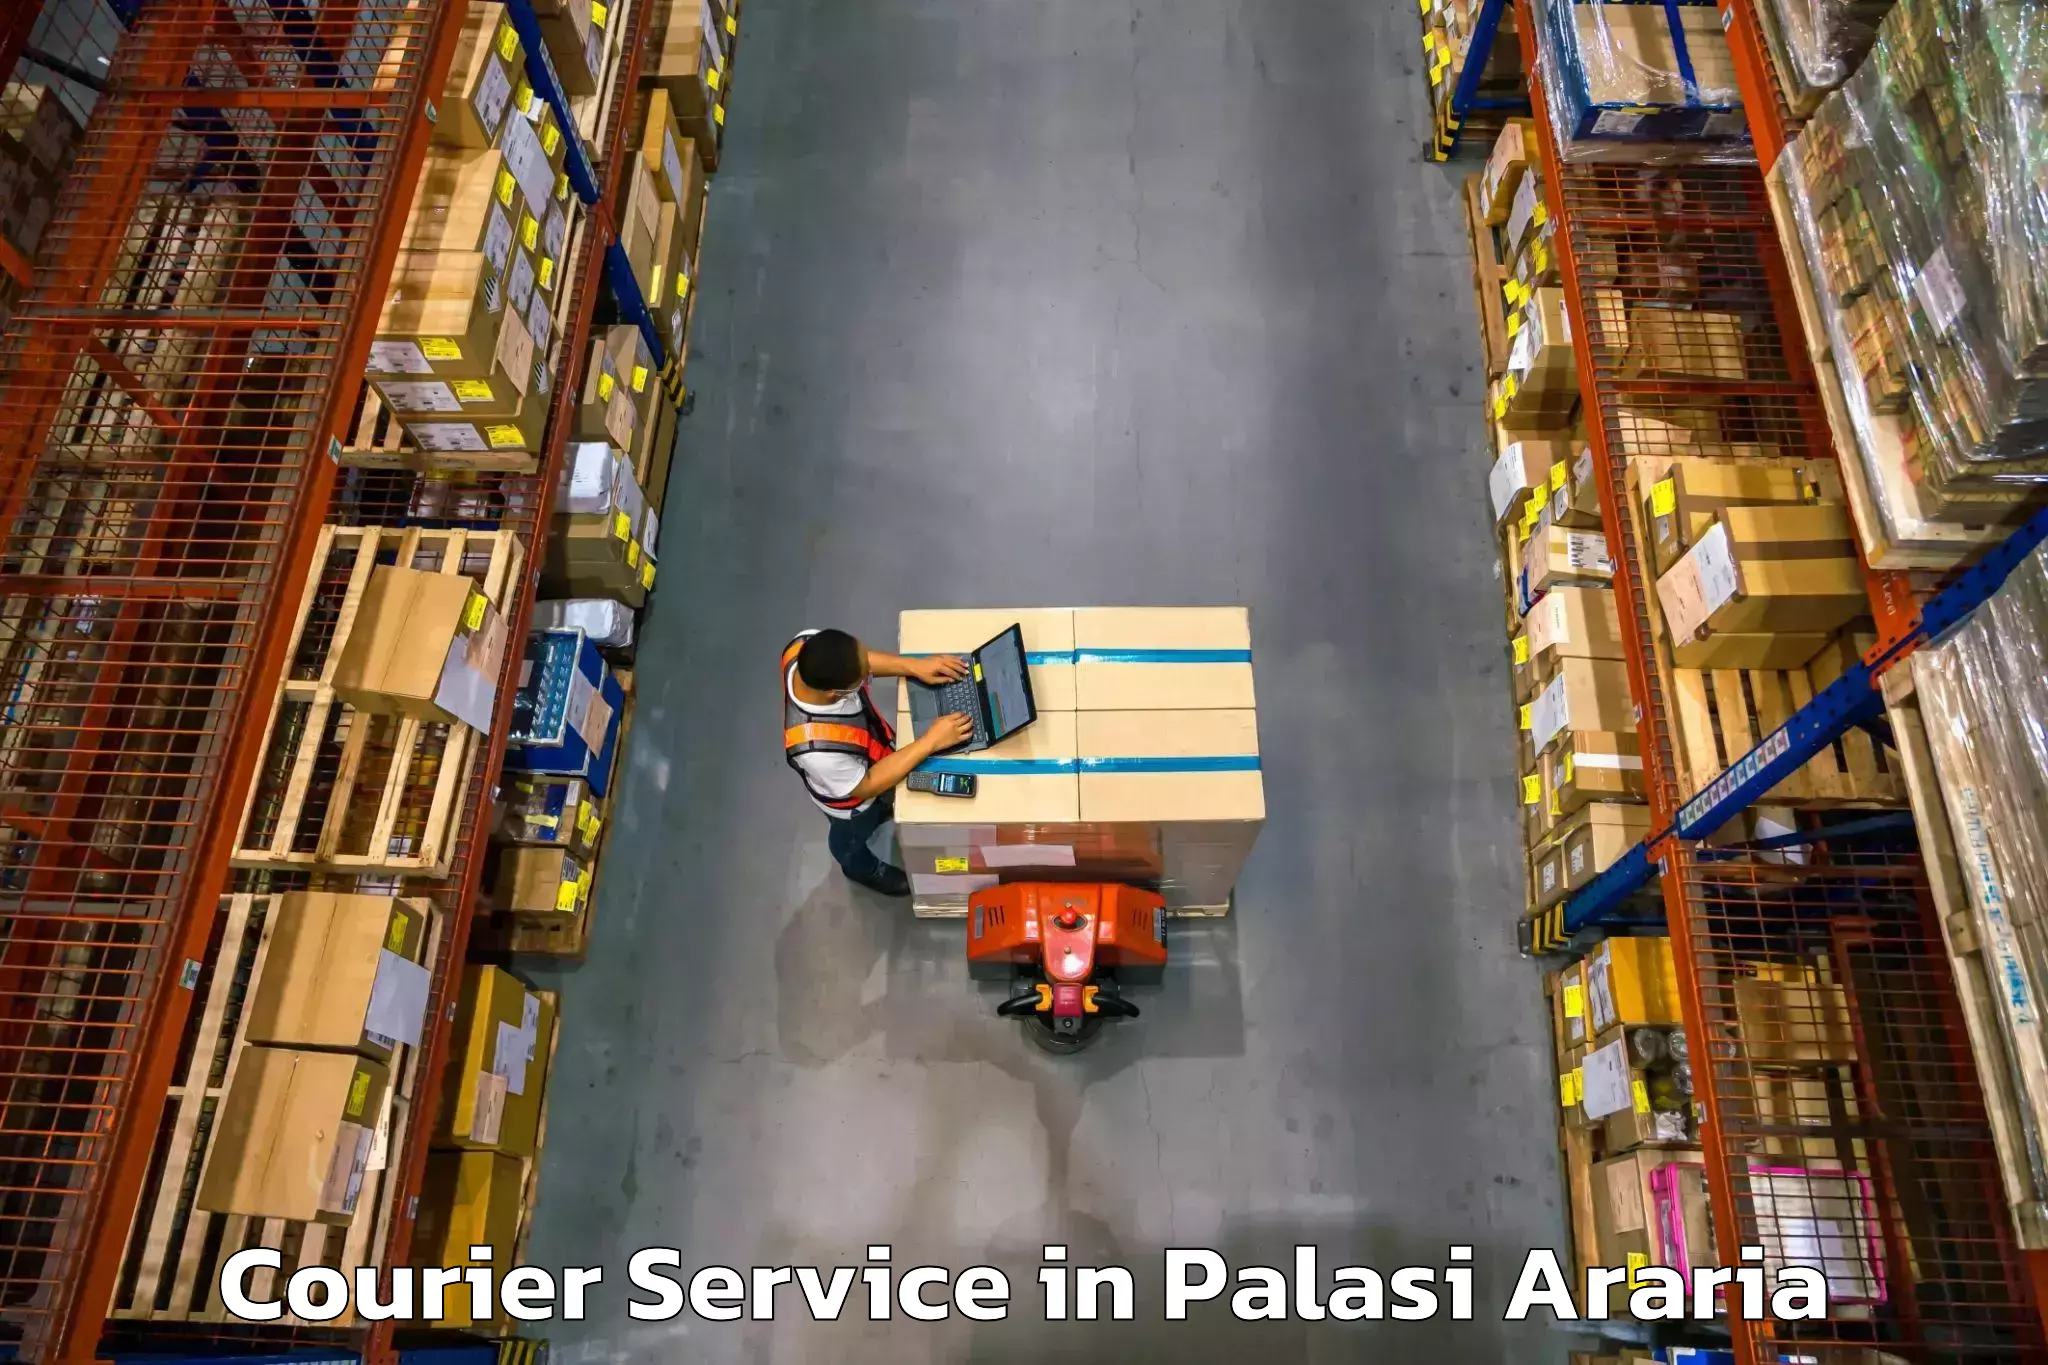 Postal and courier services in Palasi Araria